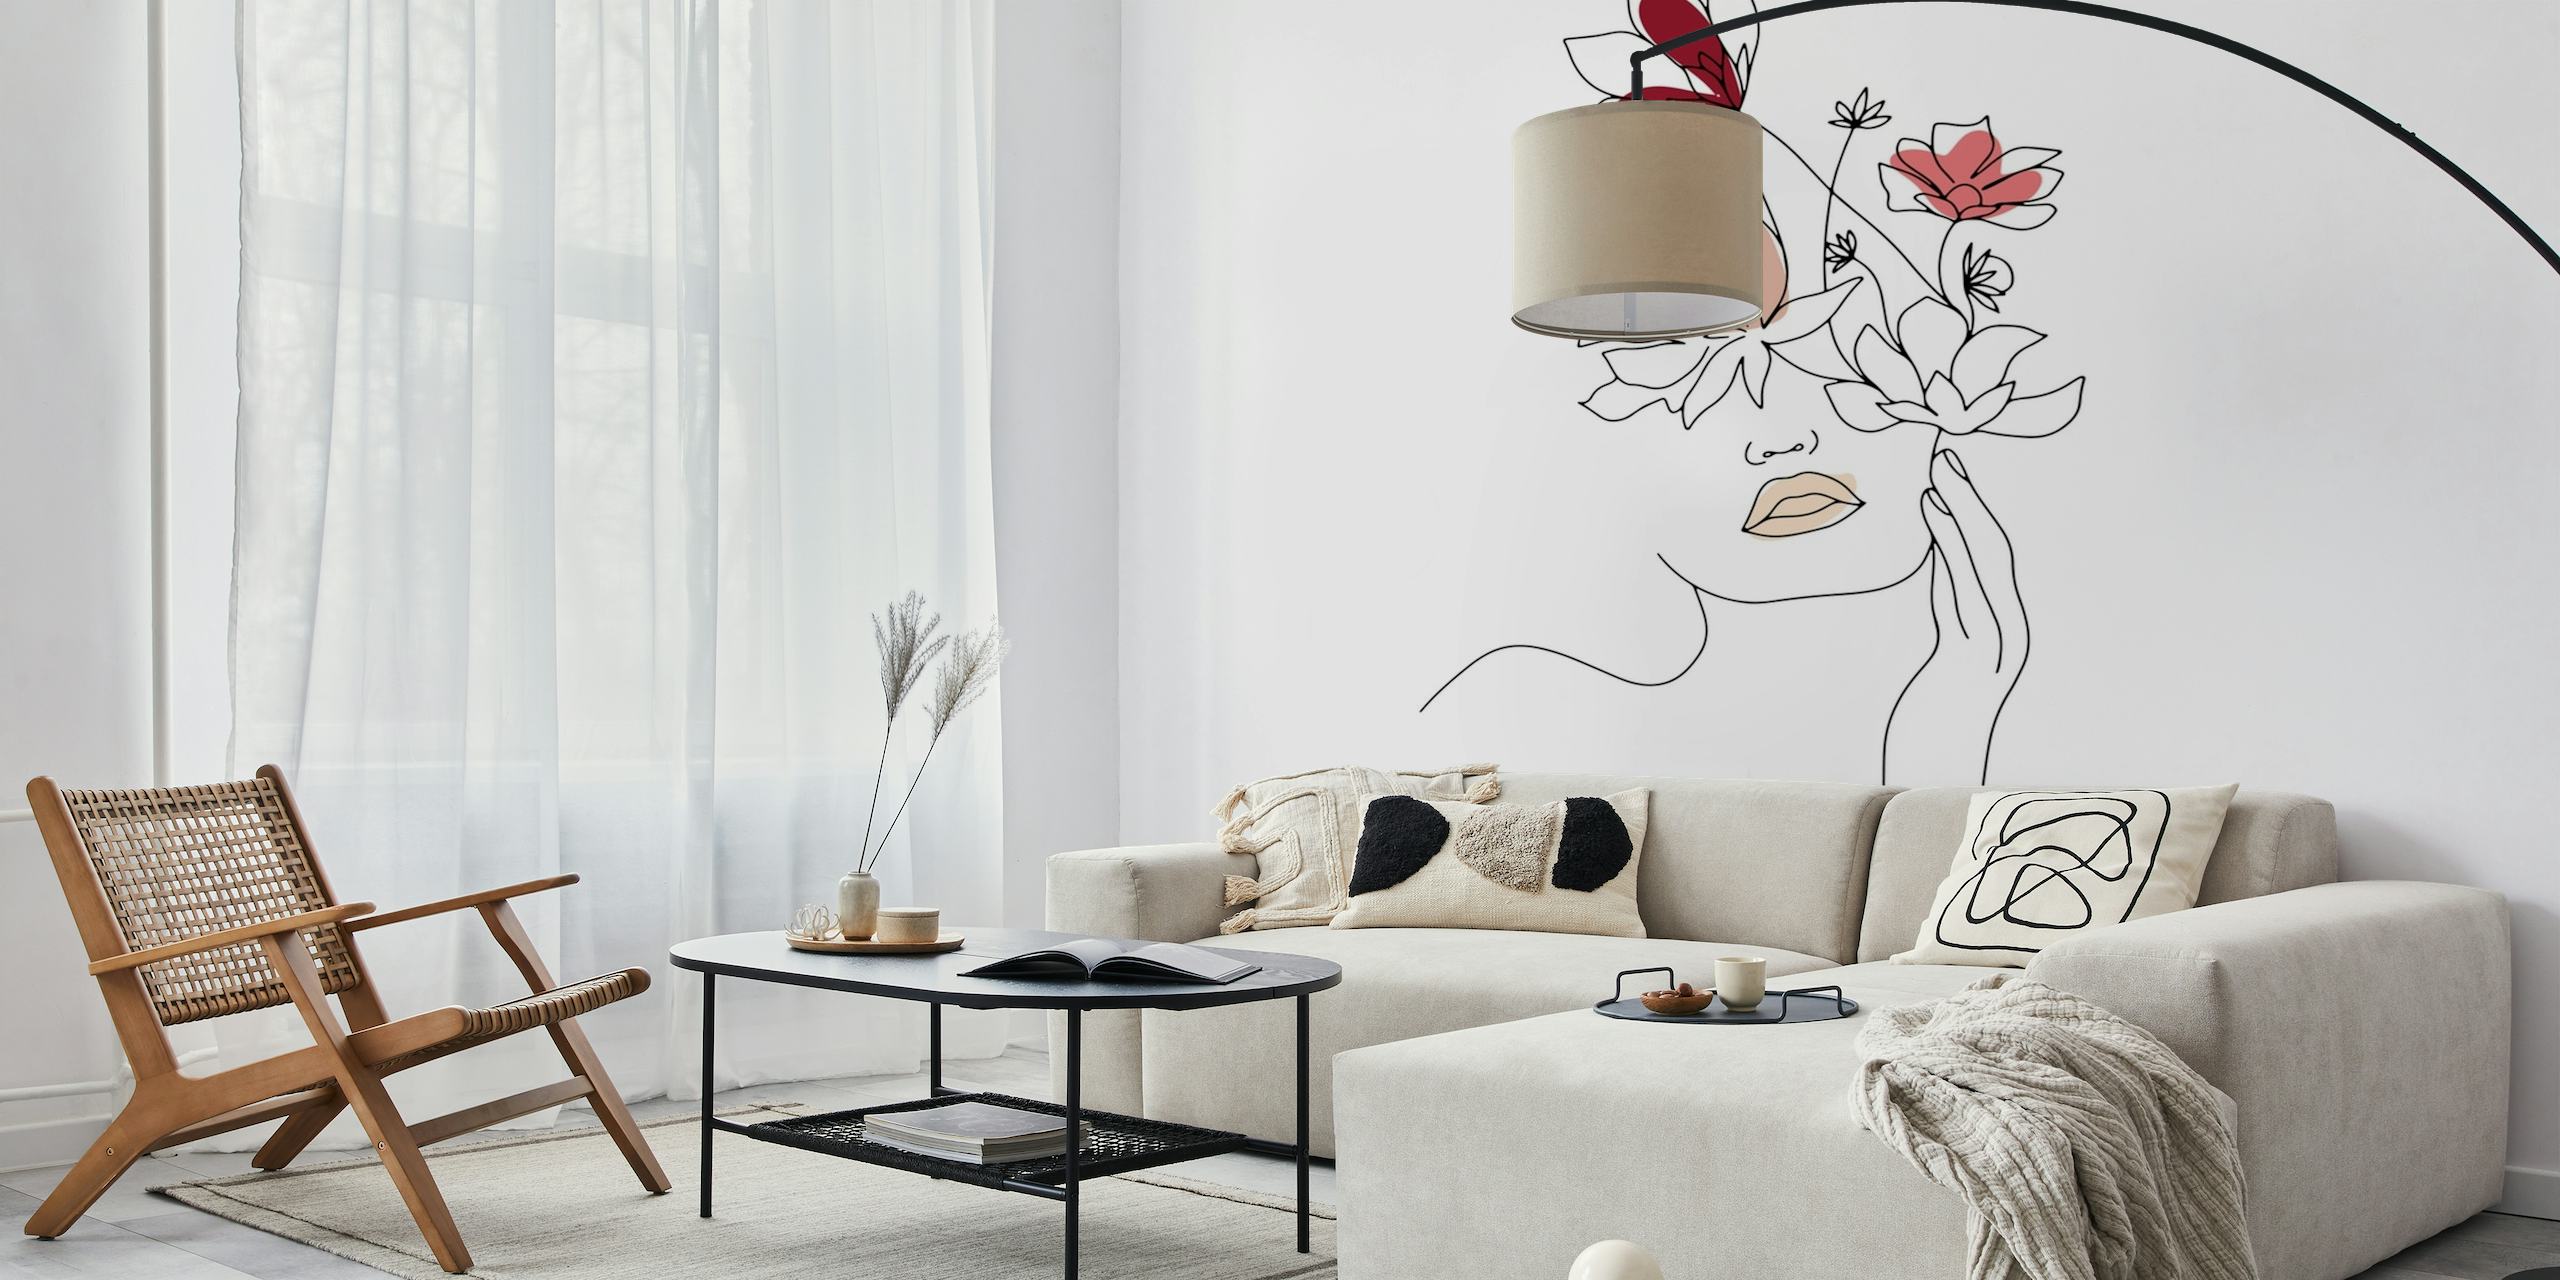 Elegant wall mural featuring a woman line art drawing surrounded by intricate floral designs